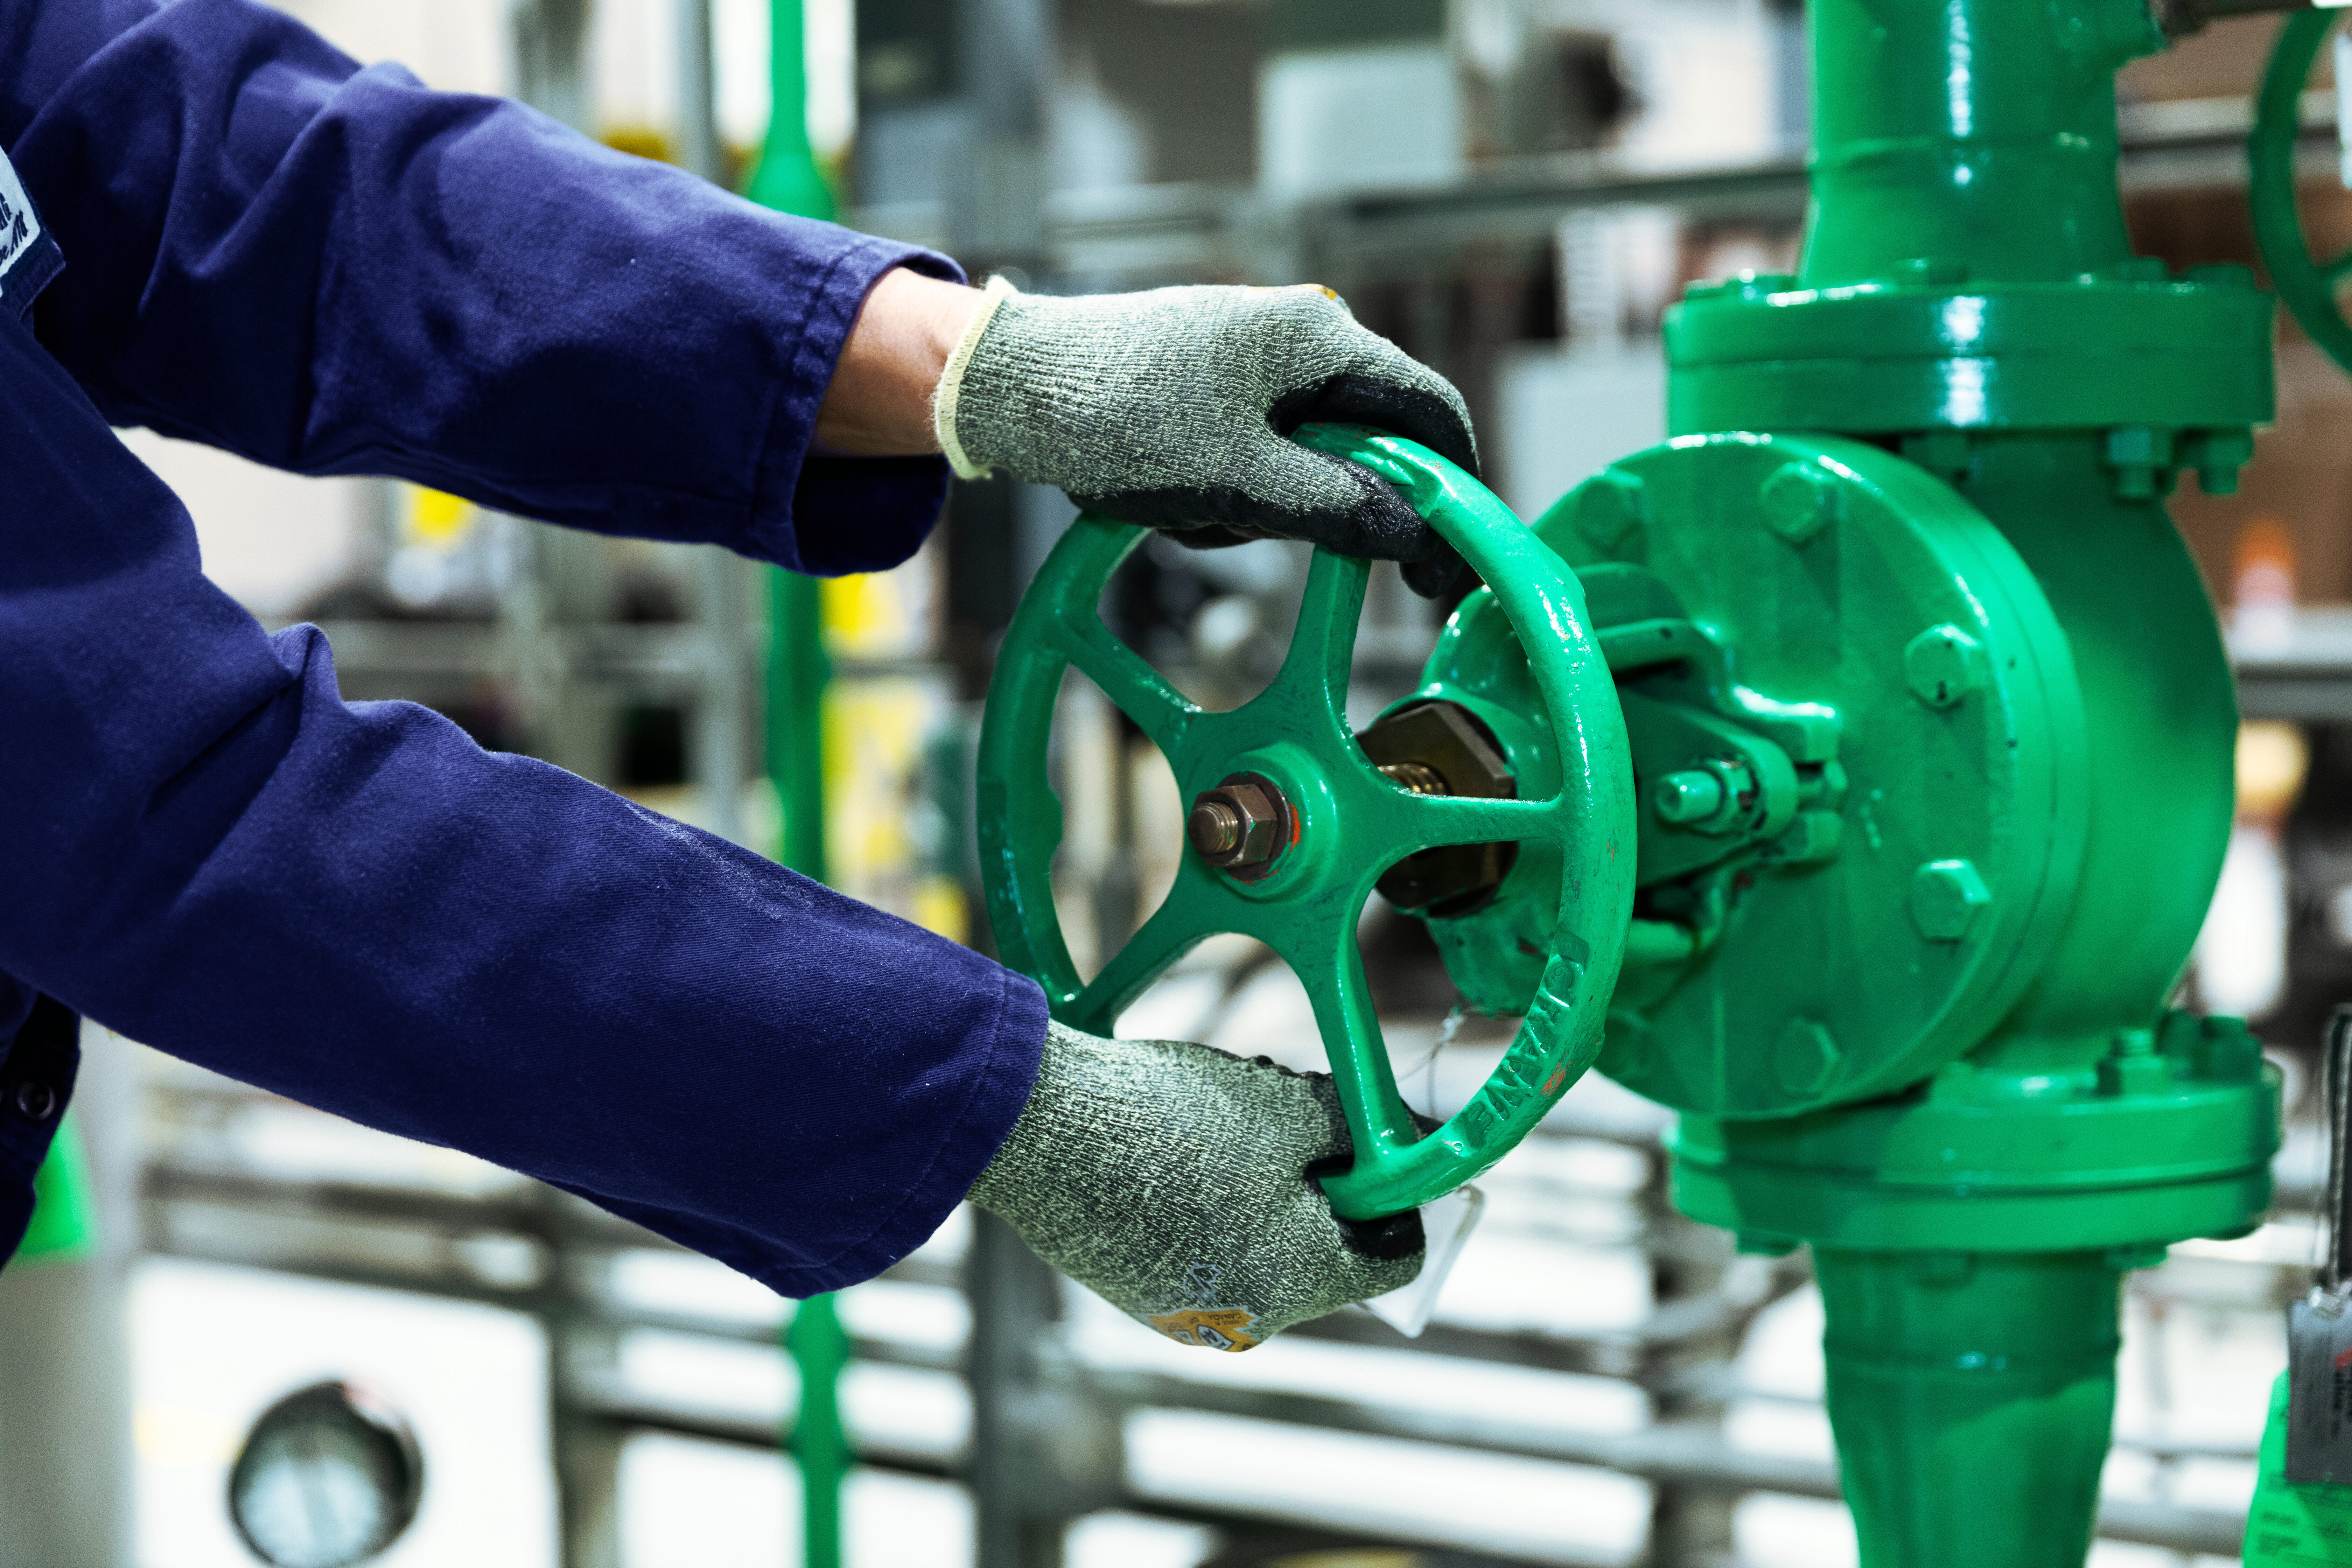 A worker's hands on a bright green valve.